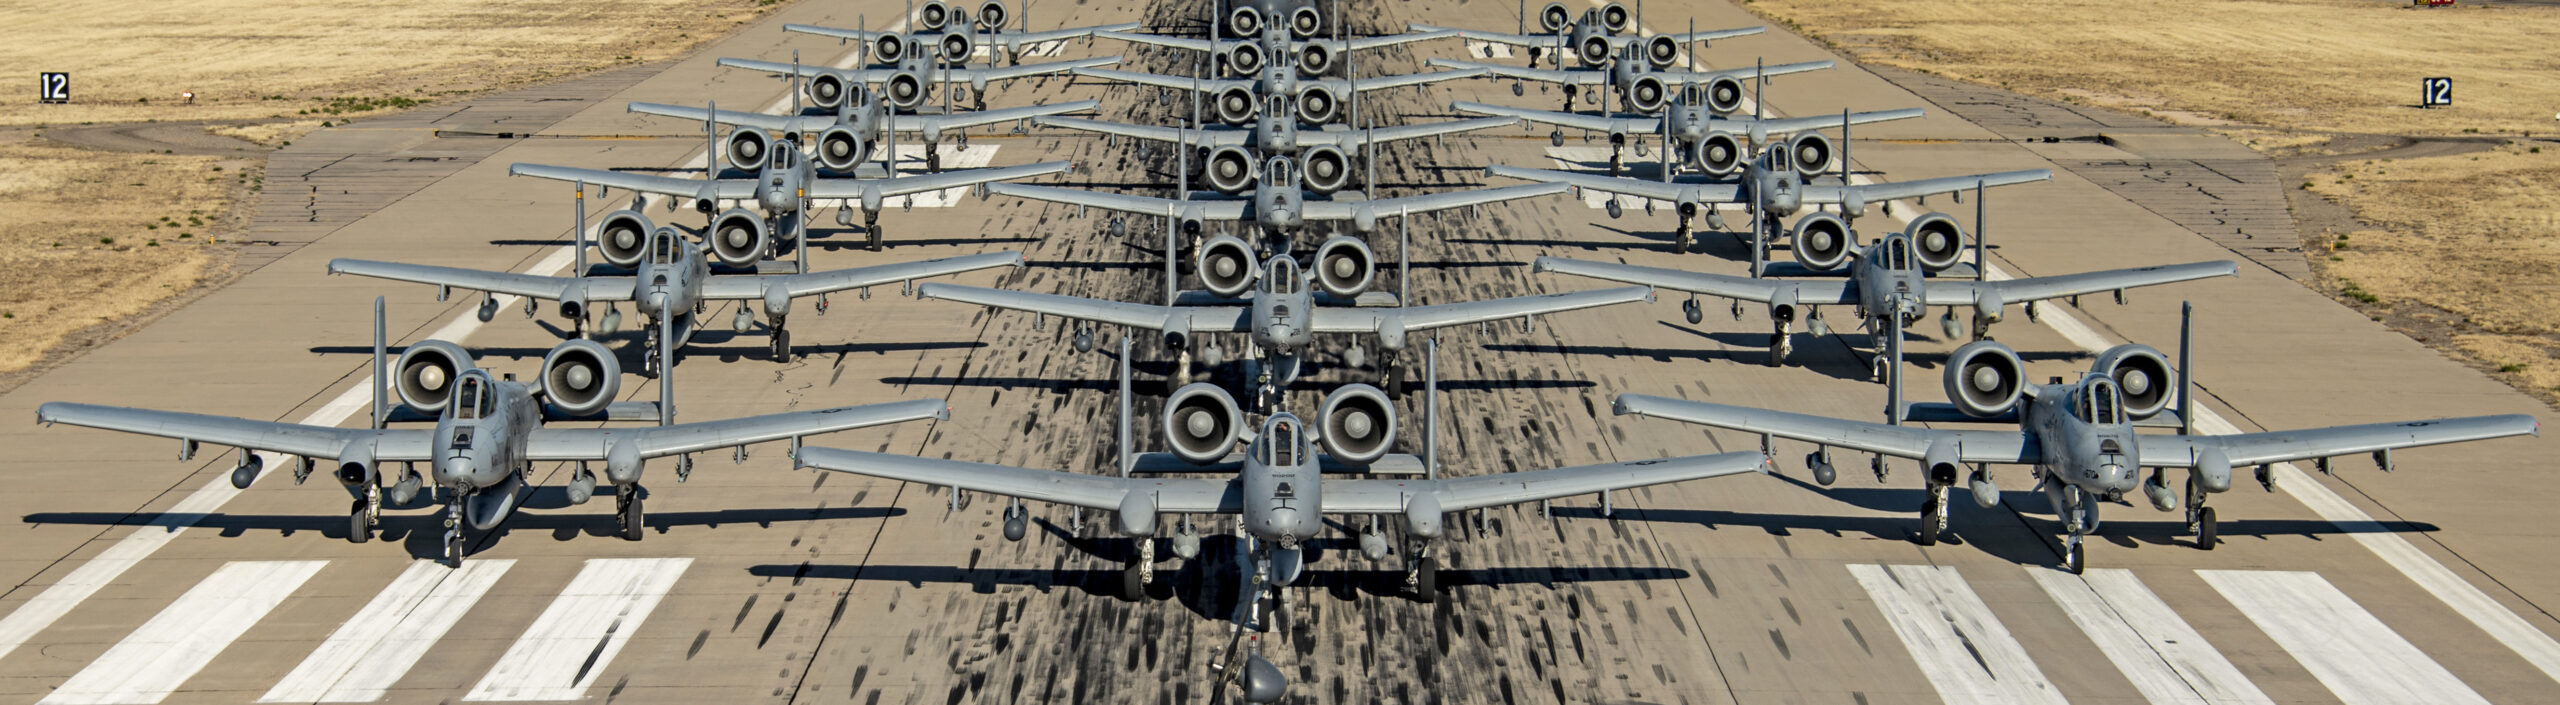 U.S. Air Force A-10 Thunderbolt IIs, an HH-60G Pave Hawk and an HC-130J Combat King II assigned to the 355th Wing taxi in formation on the runway at Davis-Monthan Air Force Base, Arizona, Feb. 9, 2022. The 355th Wing maintains and operates A-10 Thunderbolt IIs, HH-60G Pave Hawks and HC-130J Combat King IIs ensuring its Airmen and aircraft are ready to fly, fight and win. (U.S. Air Force photo by Senior Airman Alex Miller)